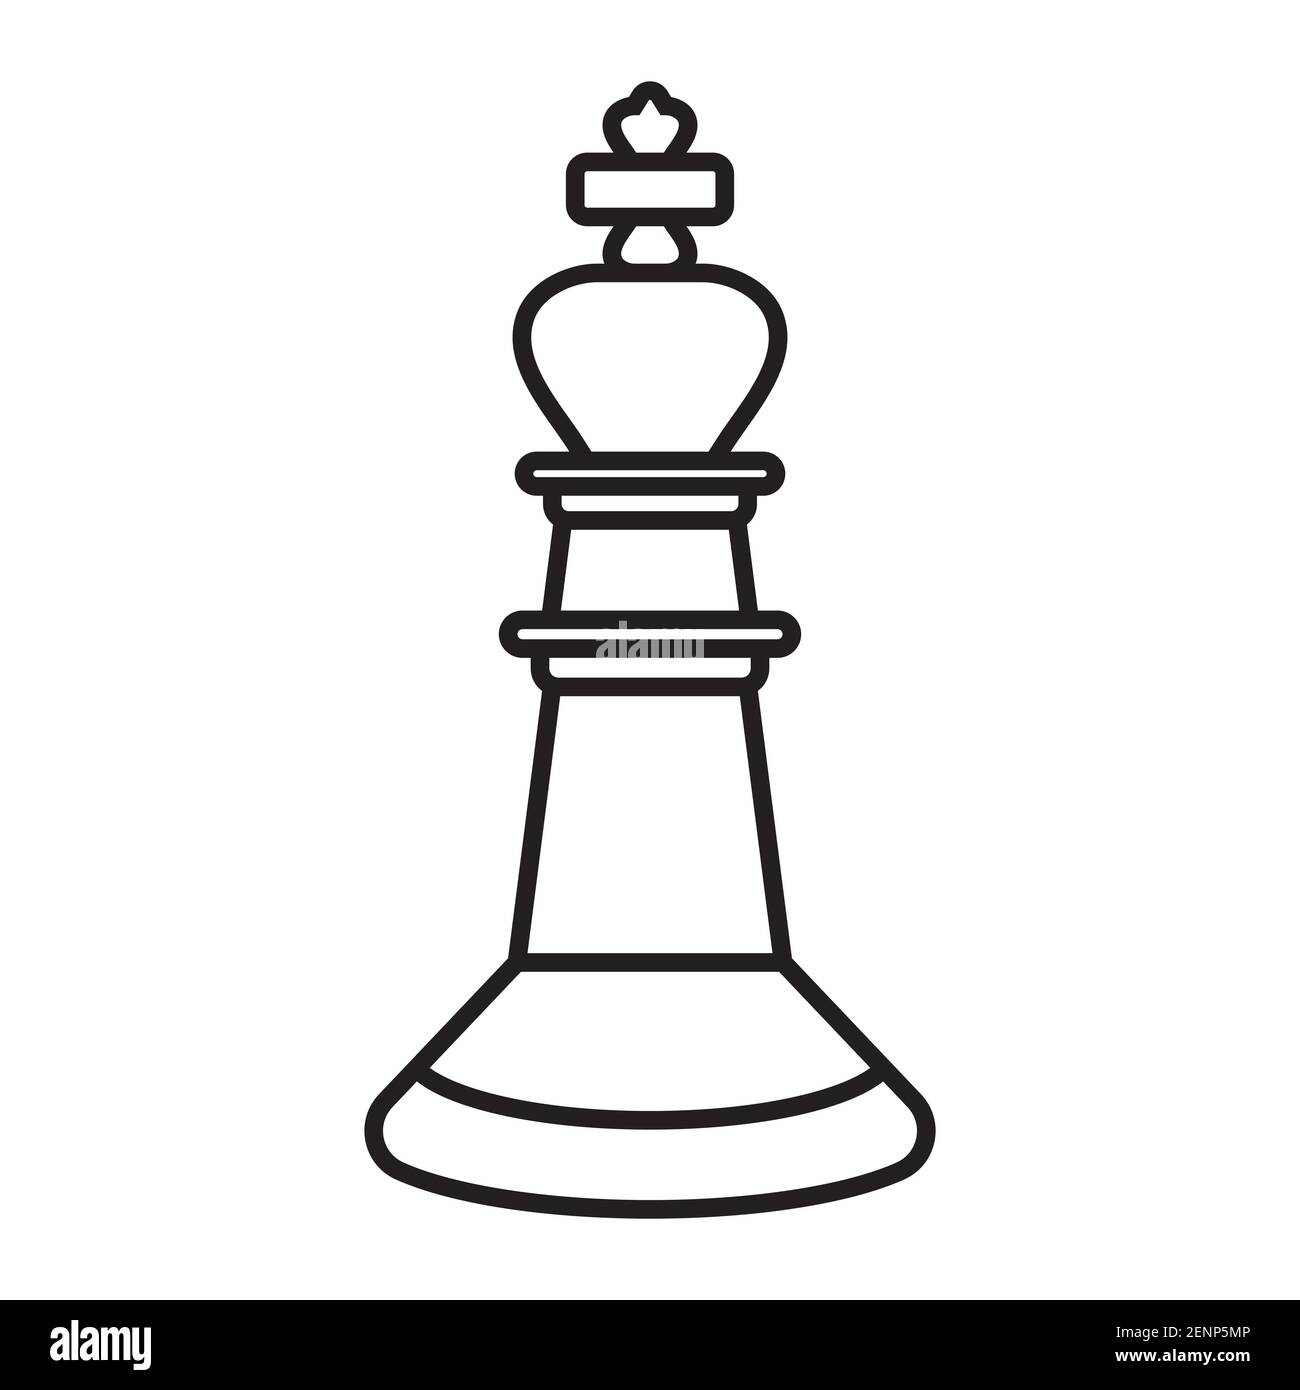 King chess piece line art icon for apps or website Stock Vector